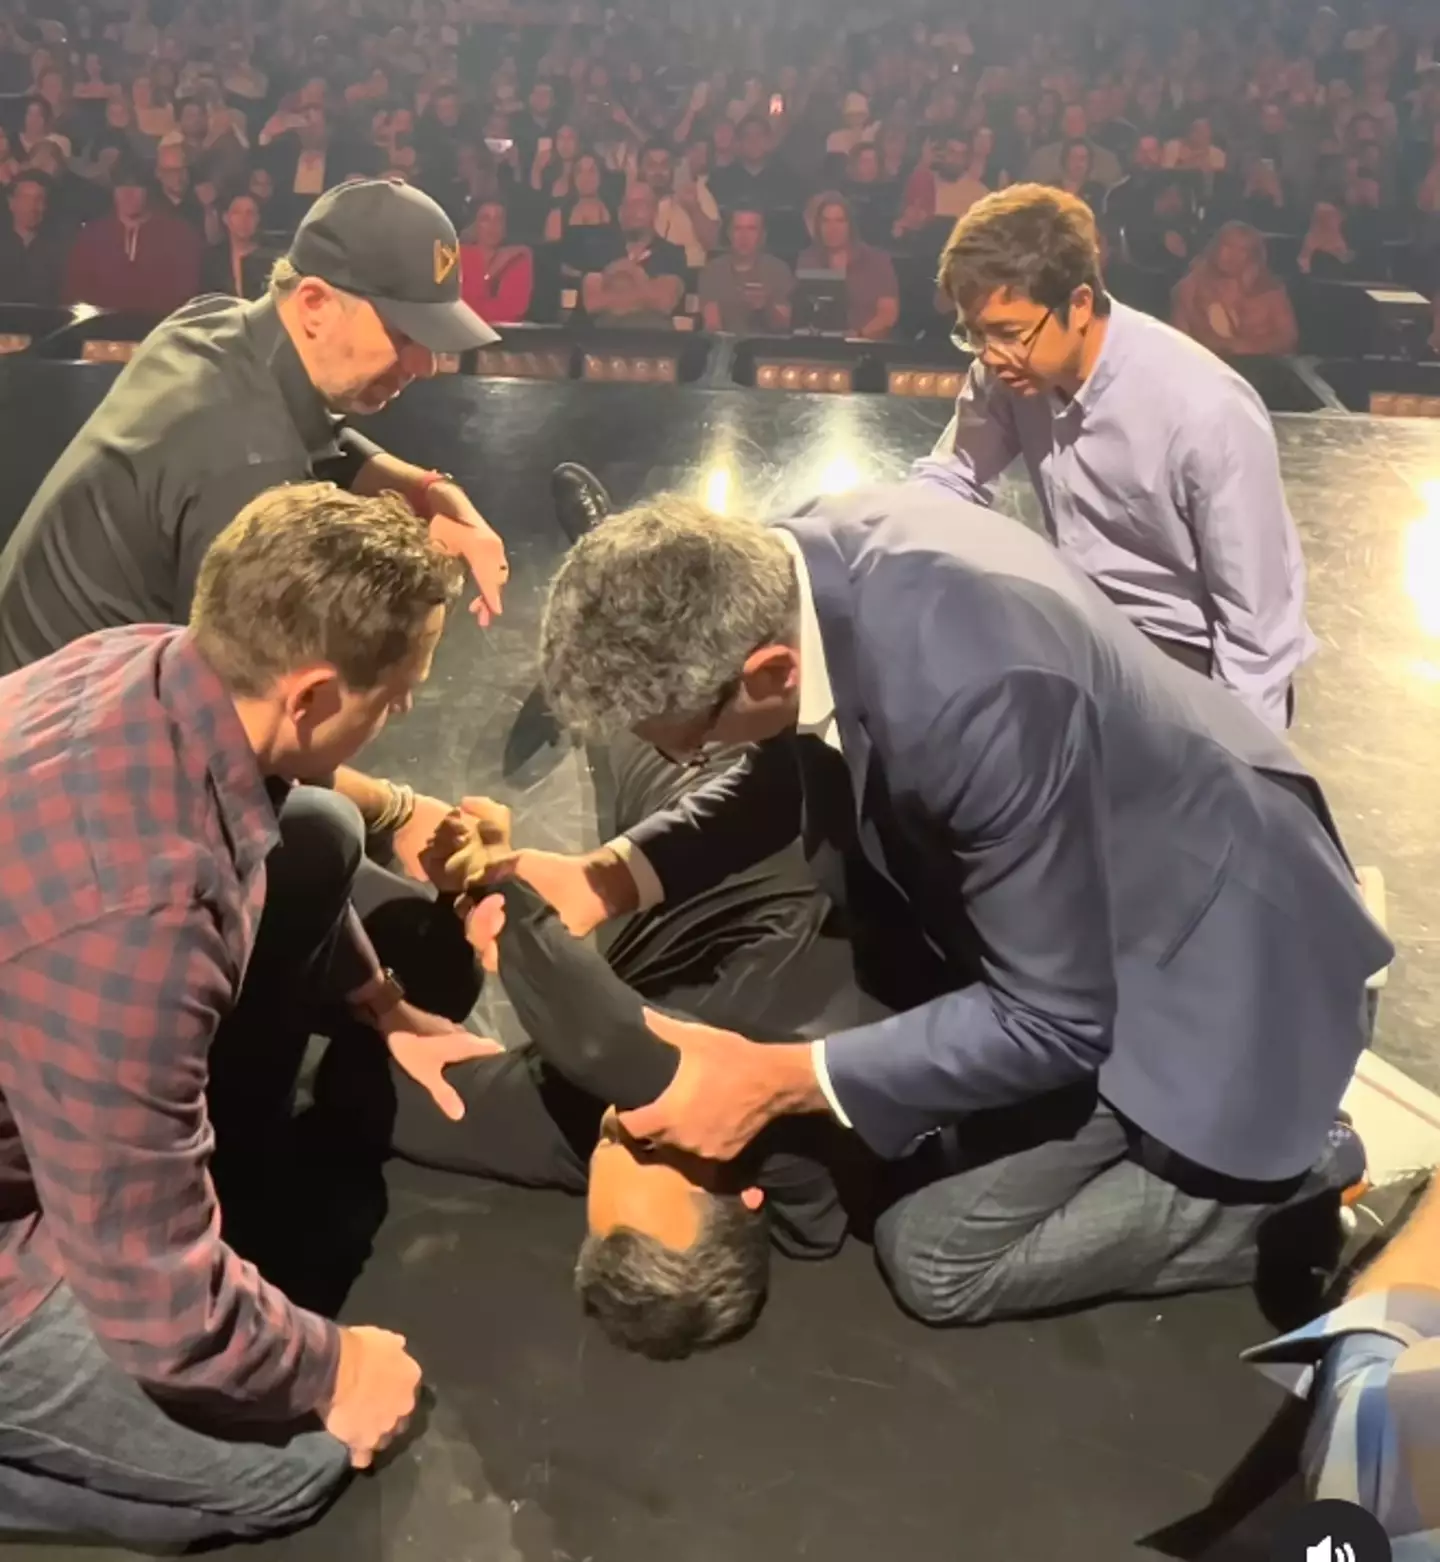 Doctors from the crowd treated him on stage.